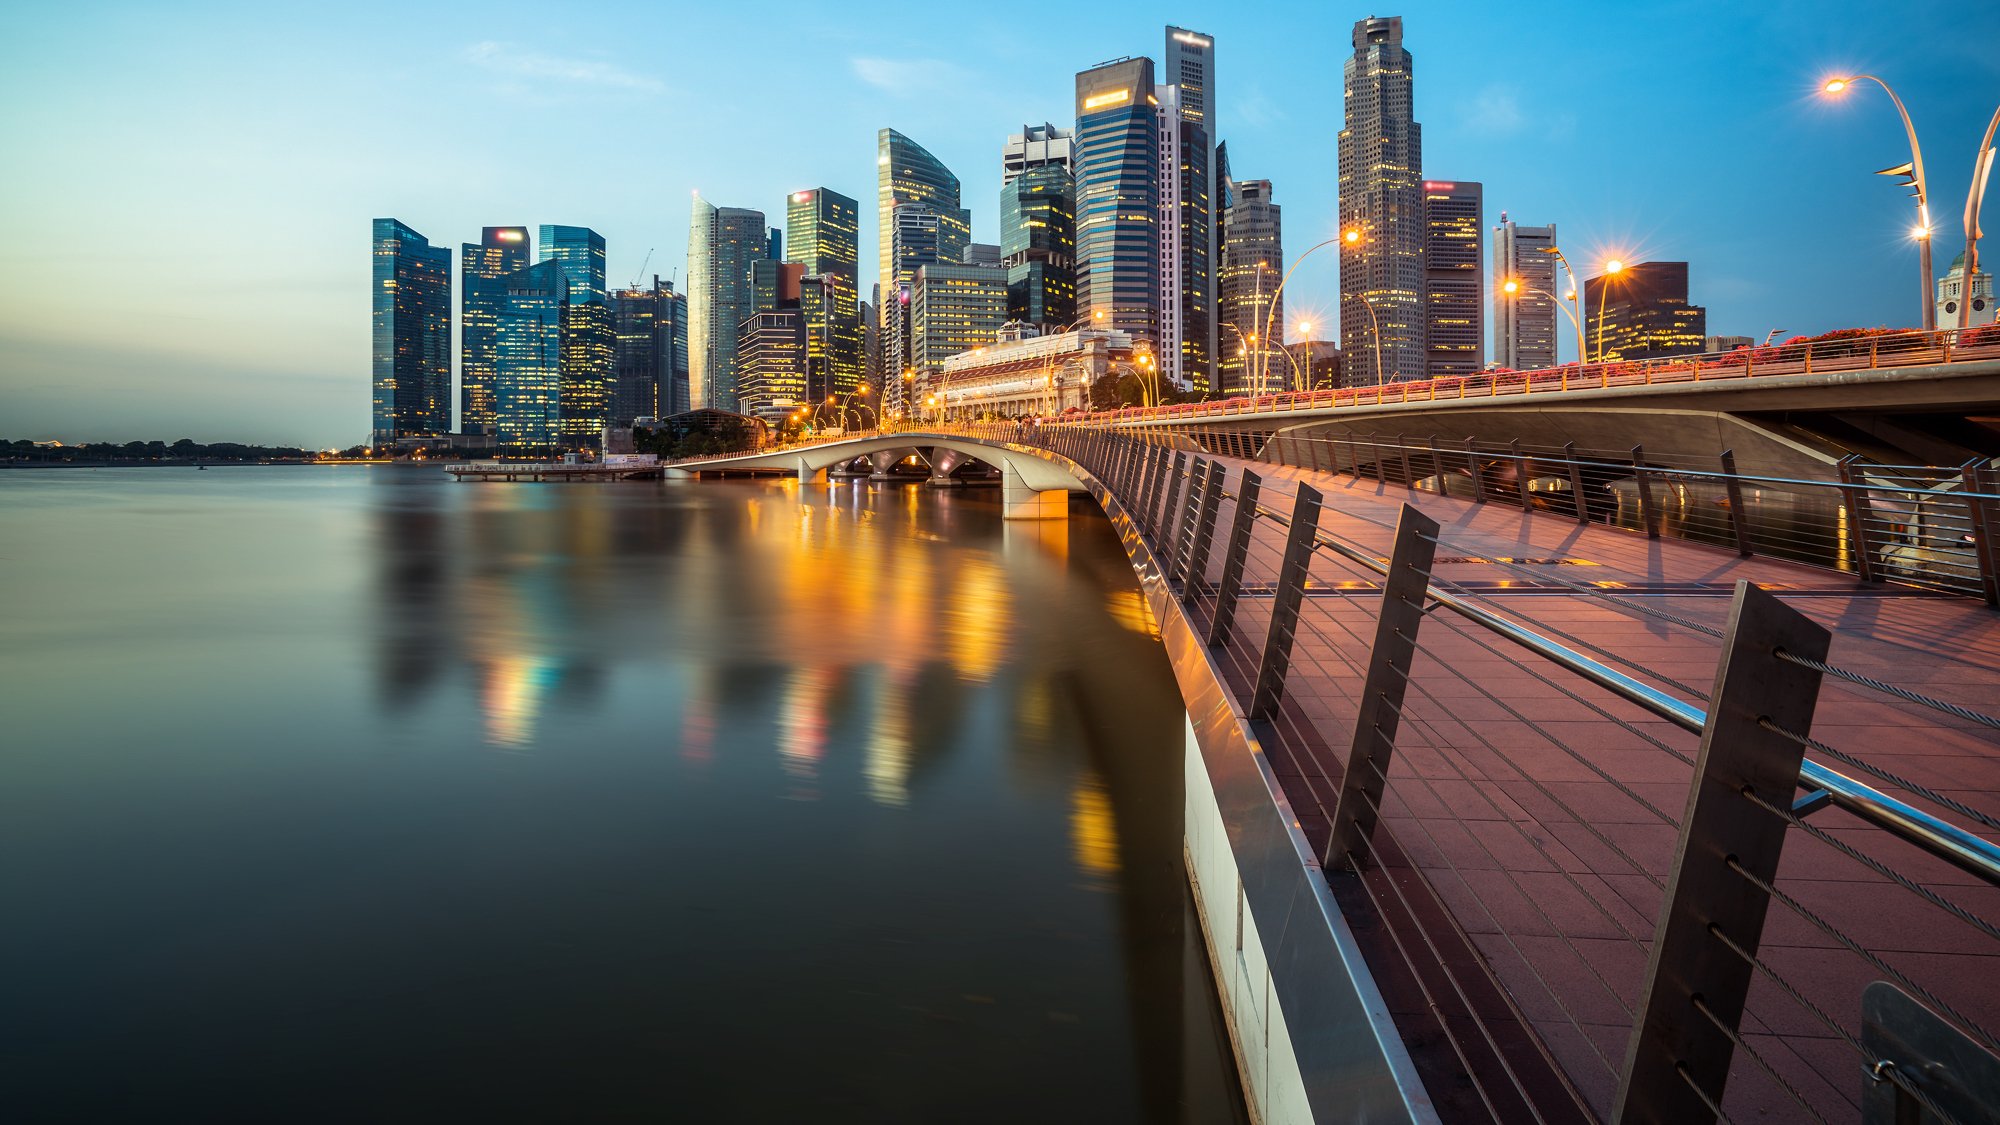 View of Singapore city over the water at dusk